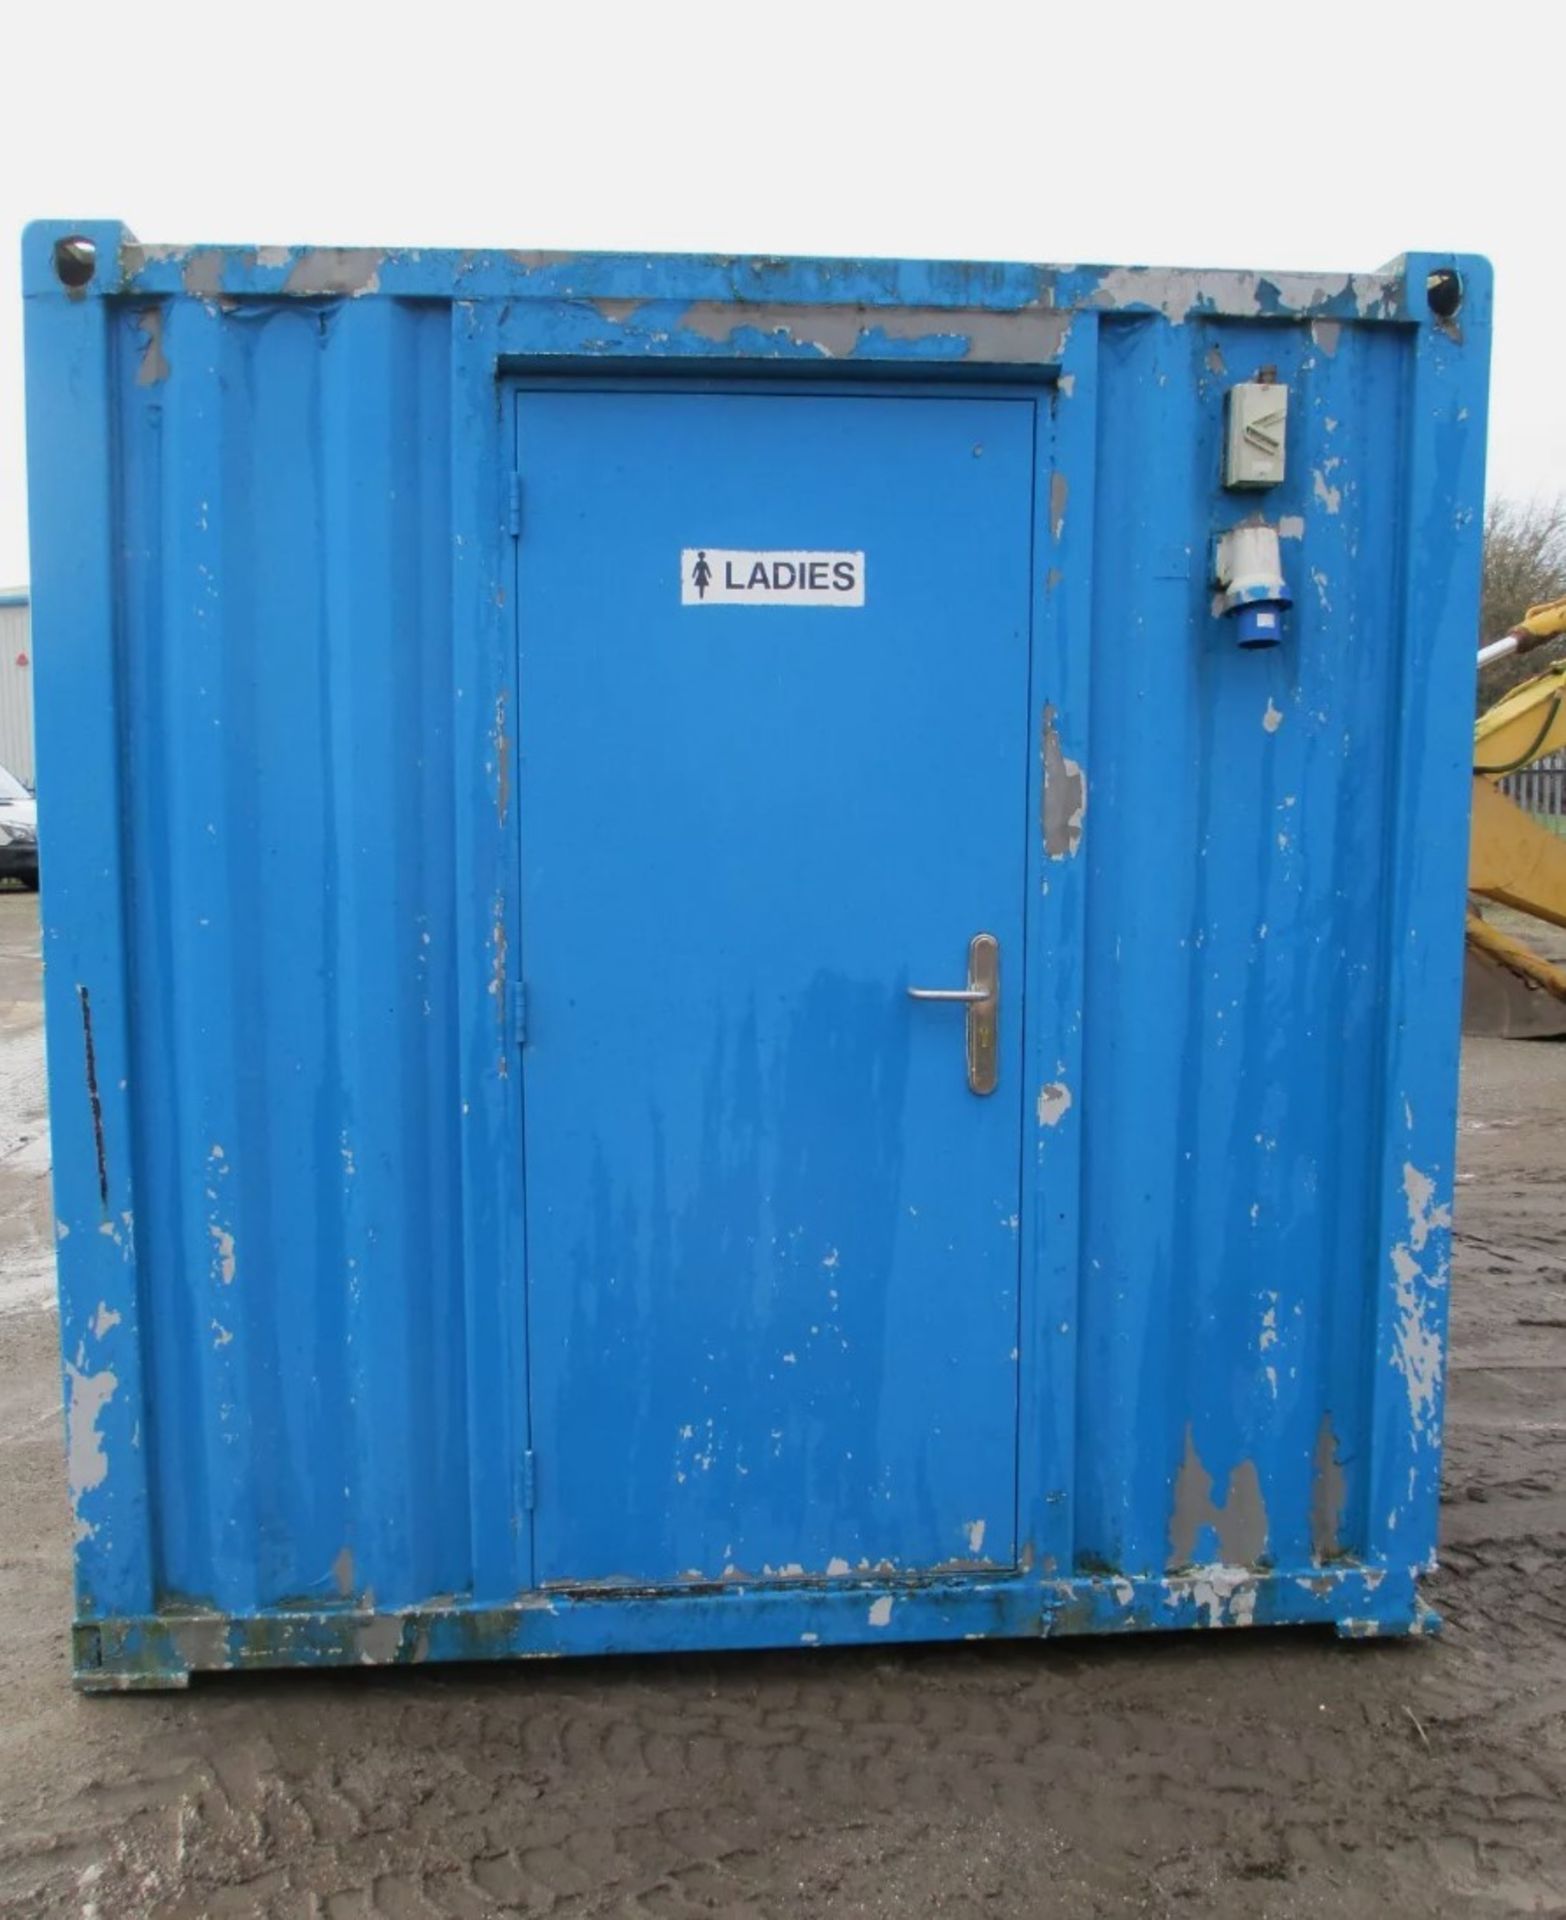 SHIPPING CONTAINER TOILET BLOCK: YOUR COMPLETE PORTABLE SANITATION SOLUTION - Image 5 of 11